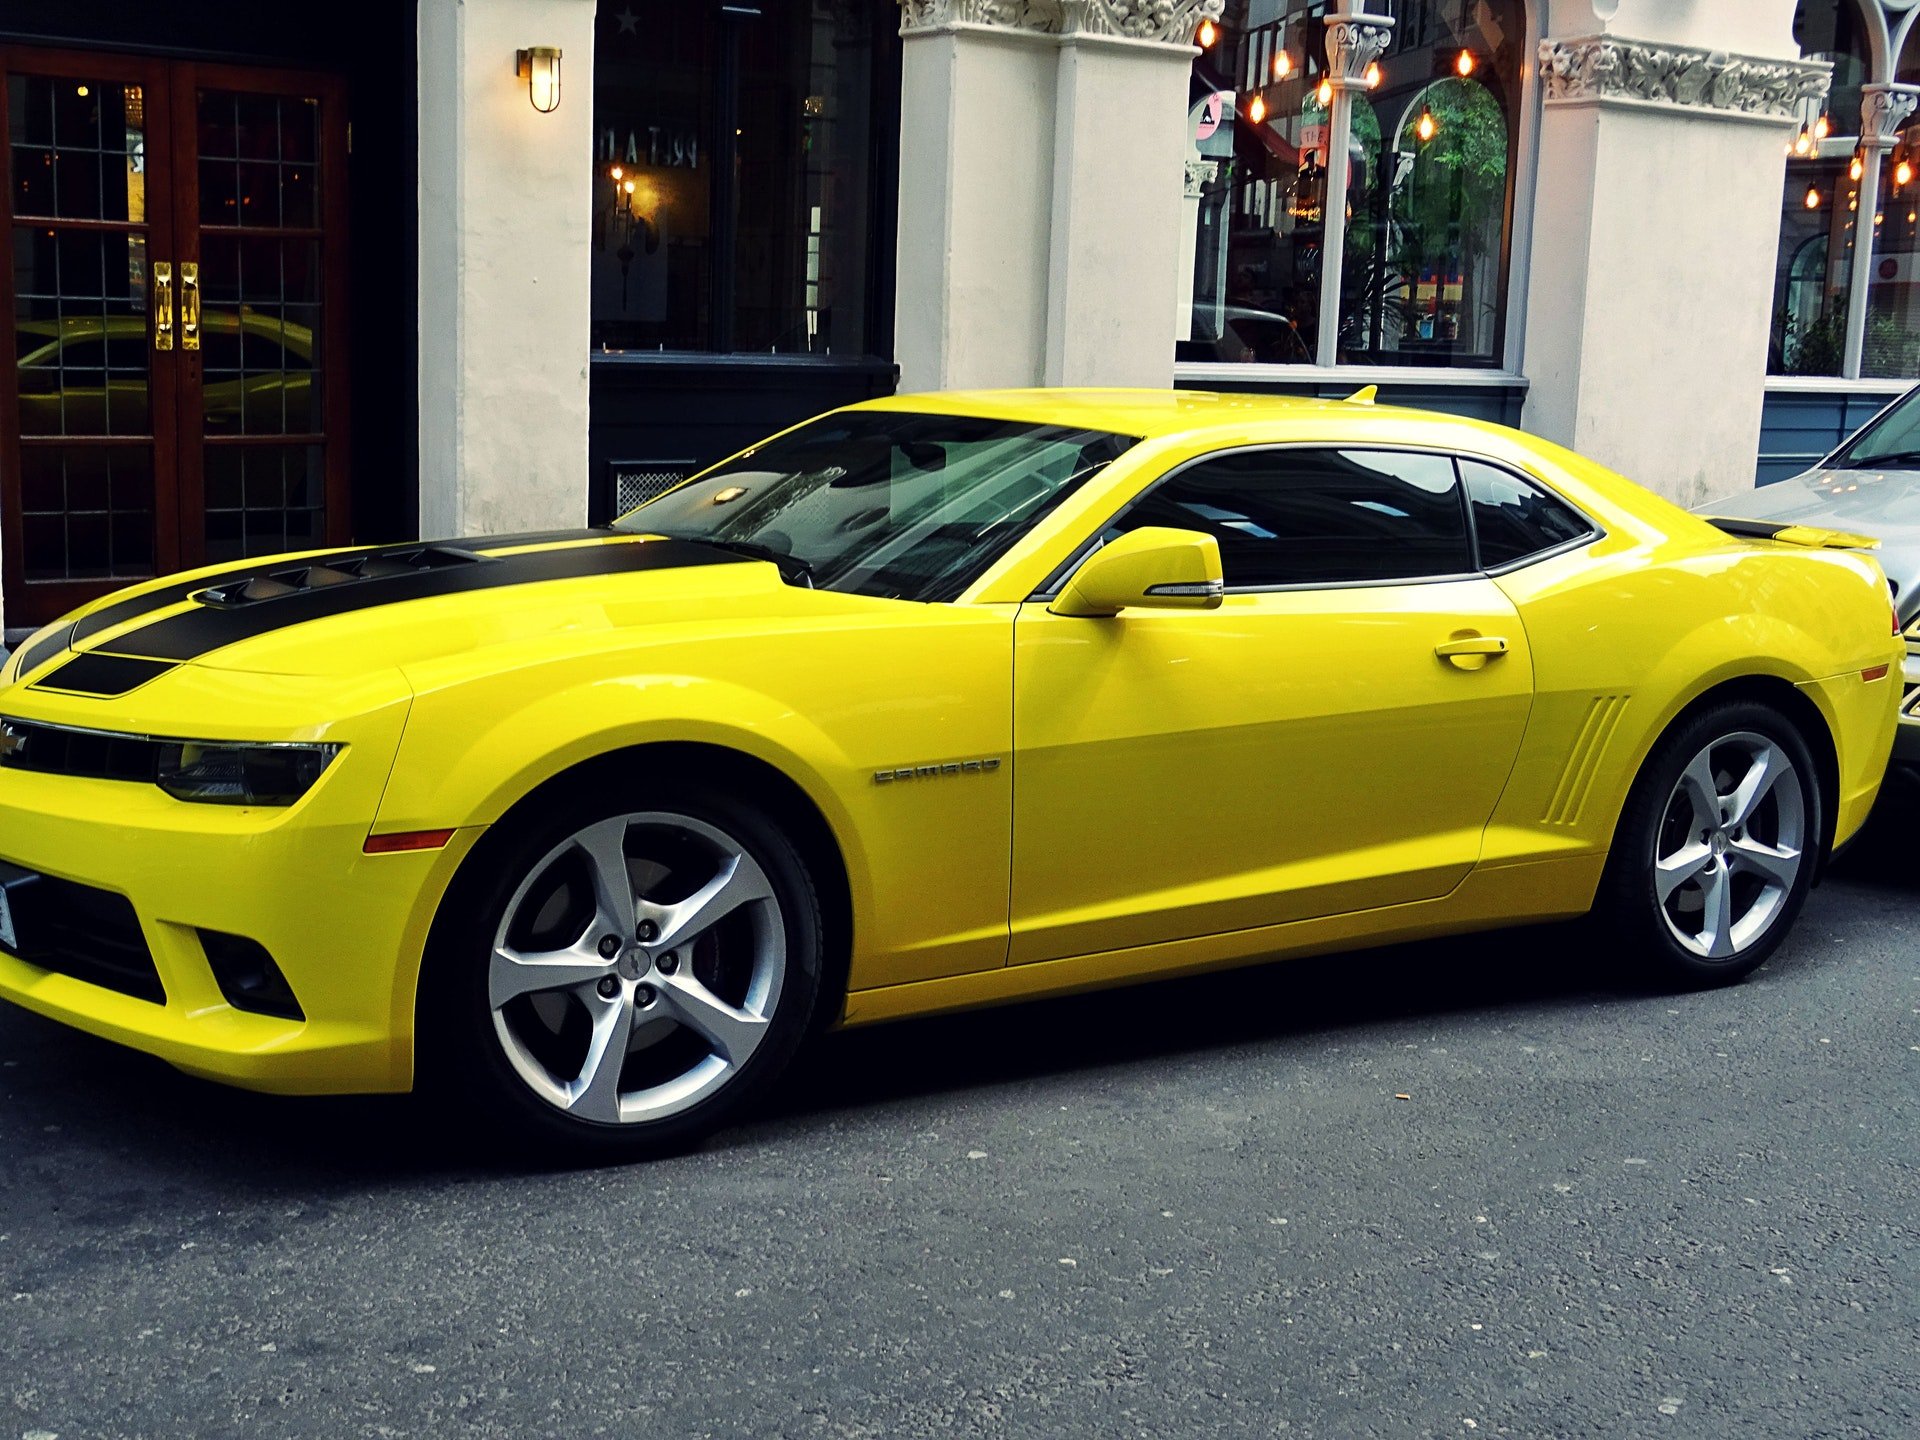 Photo of a yellow chevrolet car | Photo: Pexels